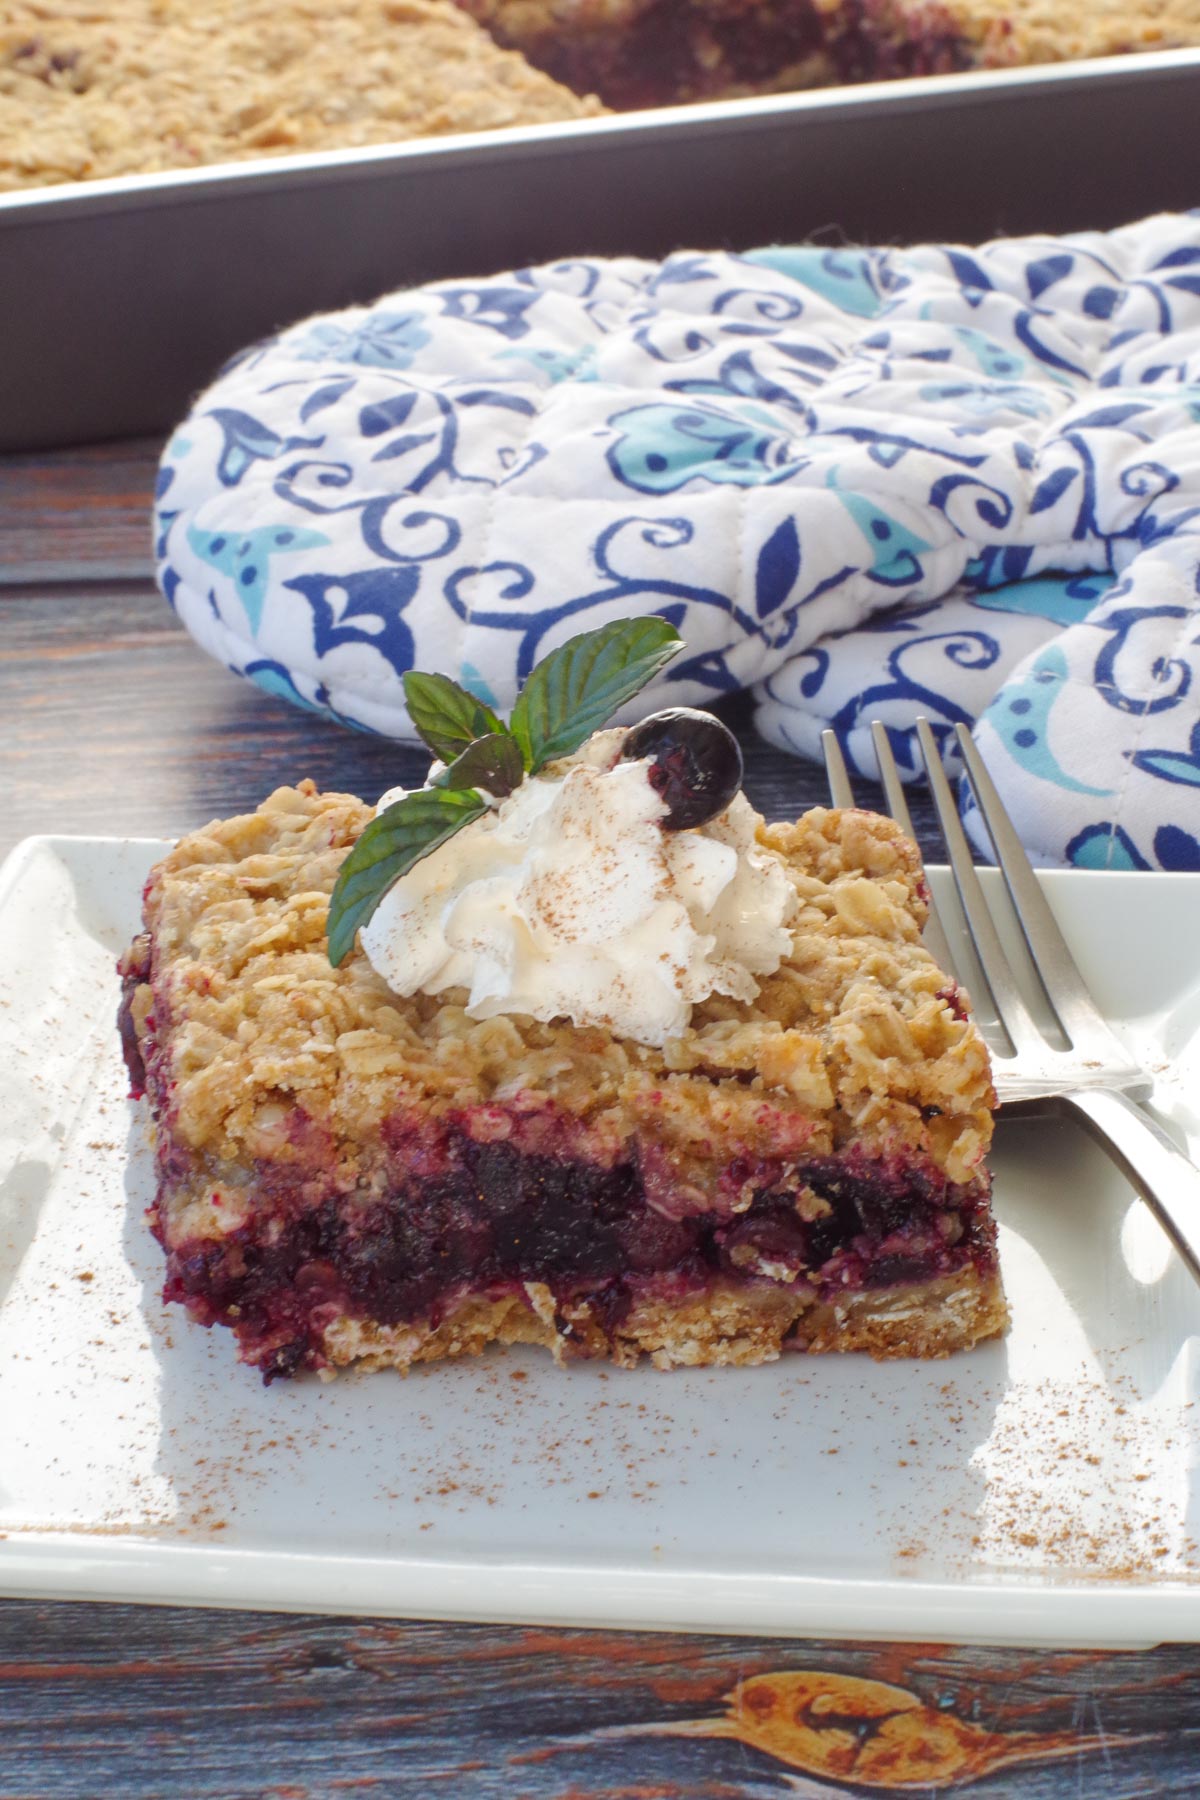 Saskatoon berry square with whipped cream on a white plate with blue flowered oven mitts and a pan of more square in the background